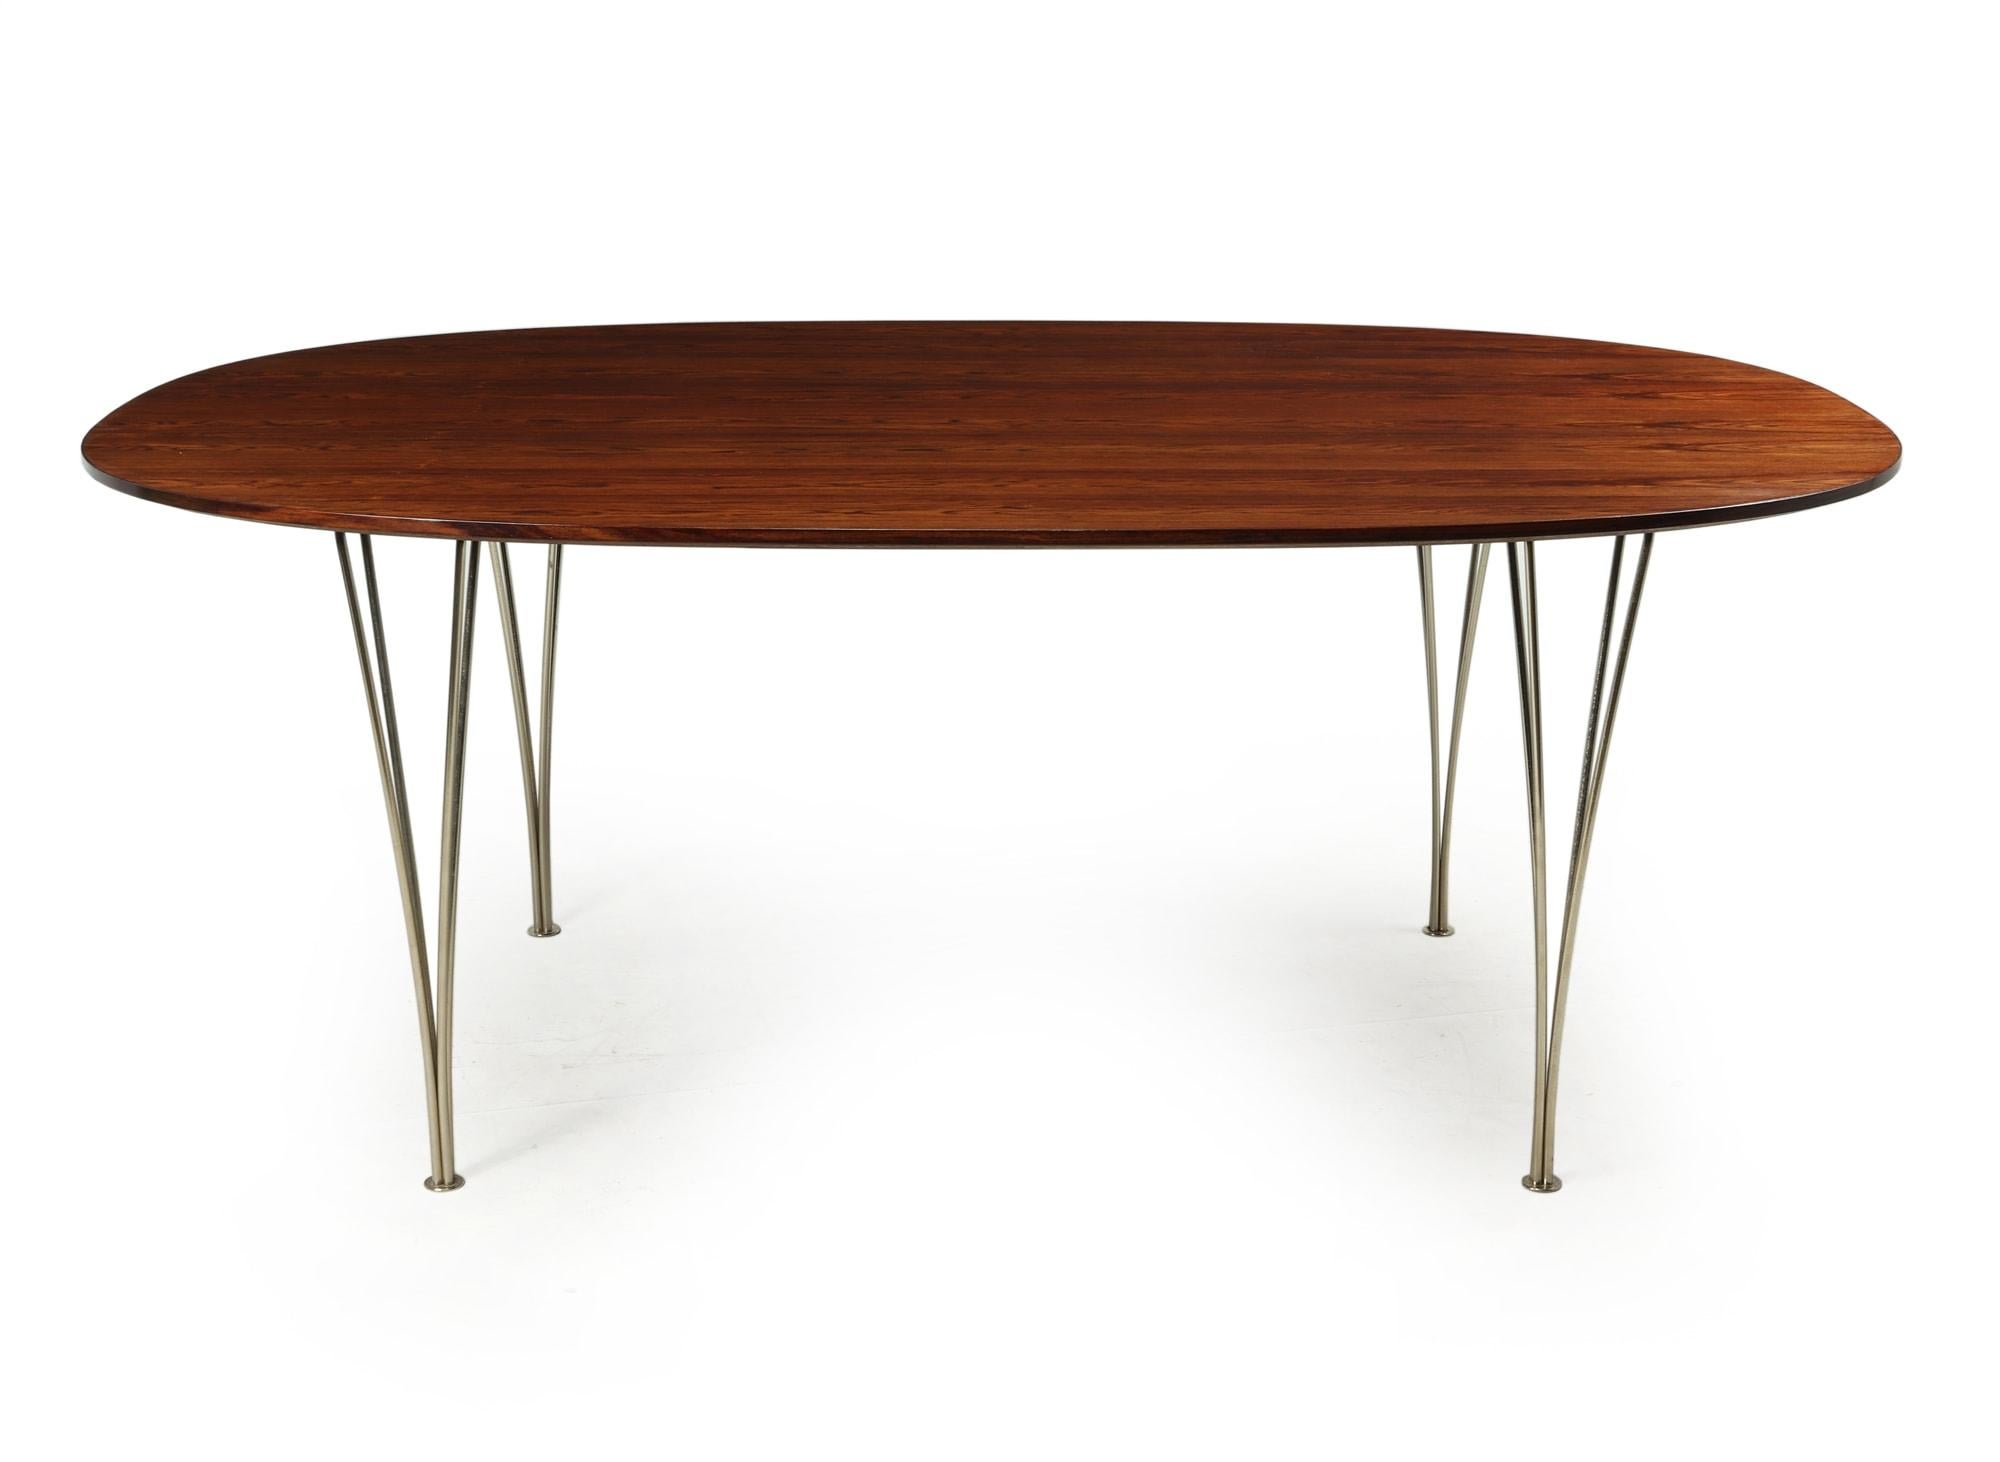 Super Elliptical Dining Table by Piet Hein and Bruno Matheson c1960
A super elliptical rosewood dining table designed by Piet Hein and Bruno Matherson and produced in rosewood by Fritz Hansen who is a very highly respected furniture maker in